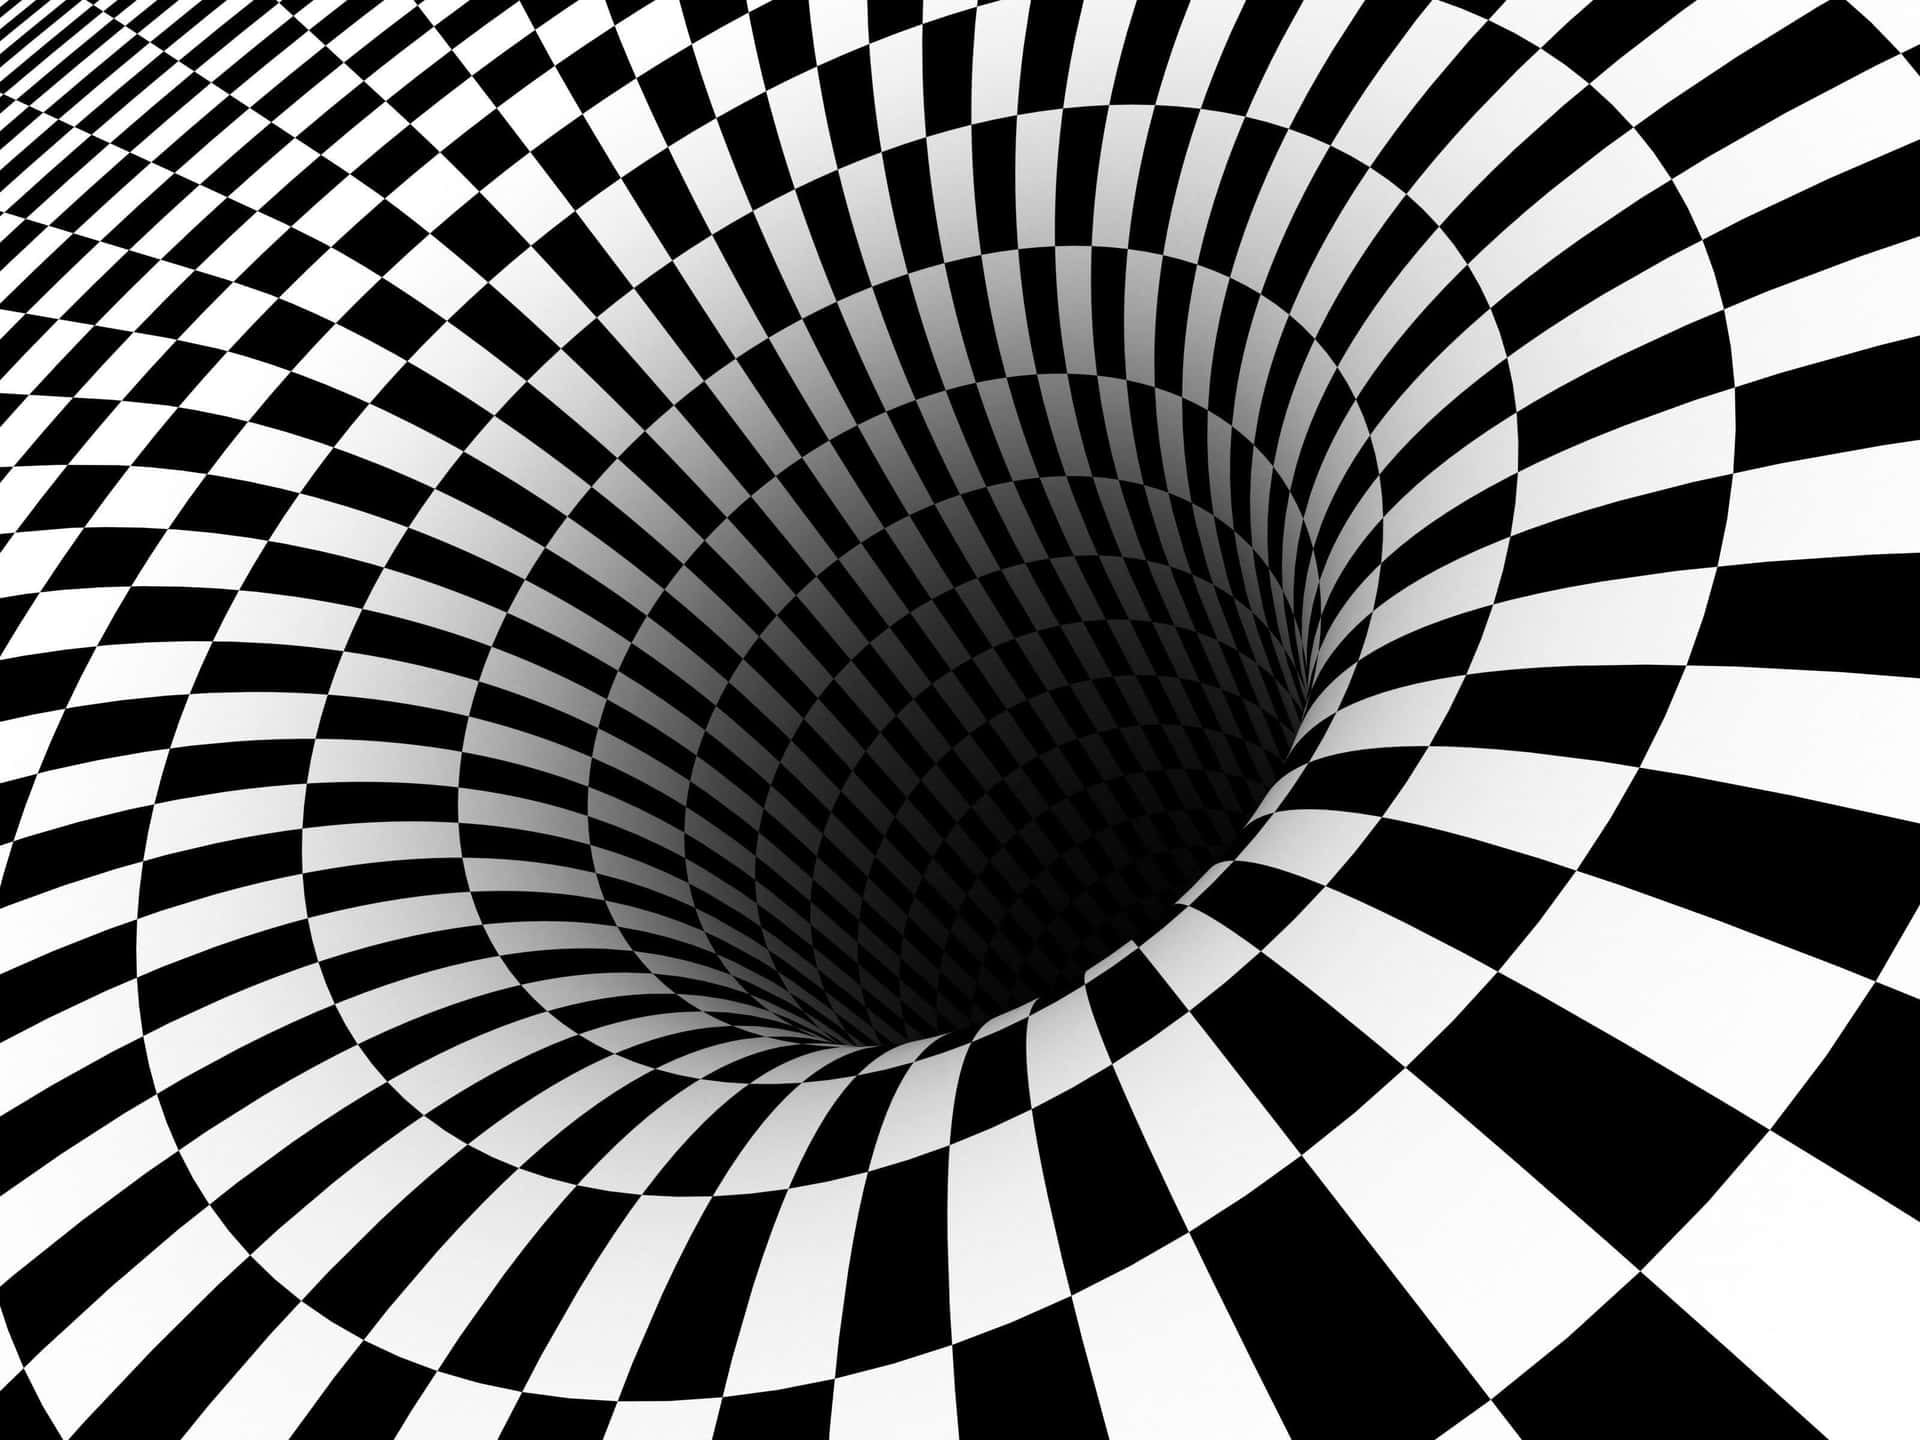 easy optical illusions black and white